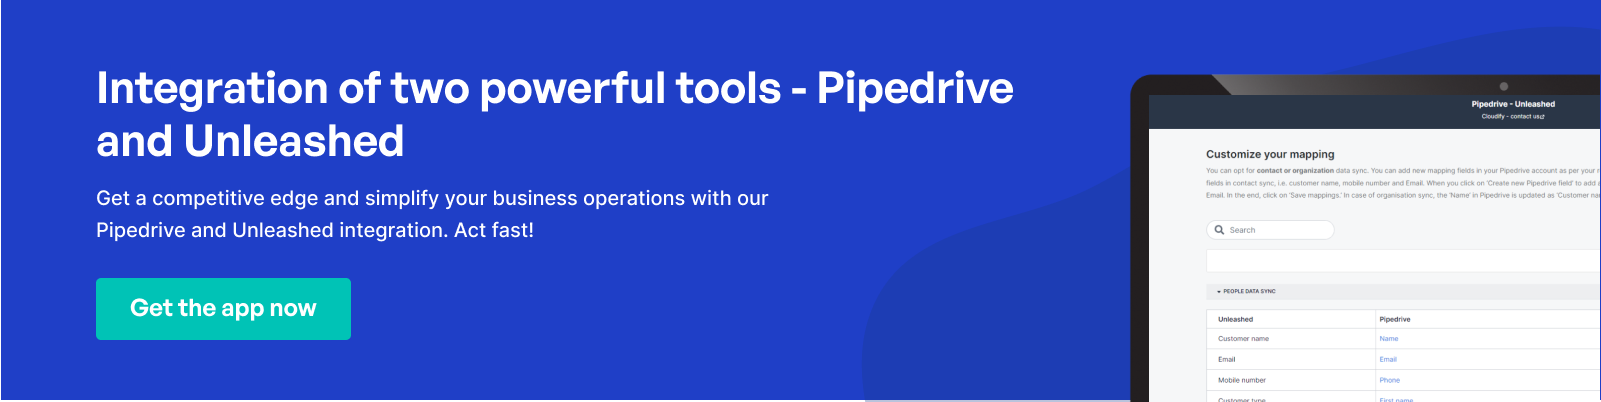 pipedrive-unleashed-CTA.png